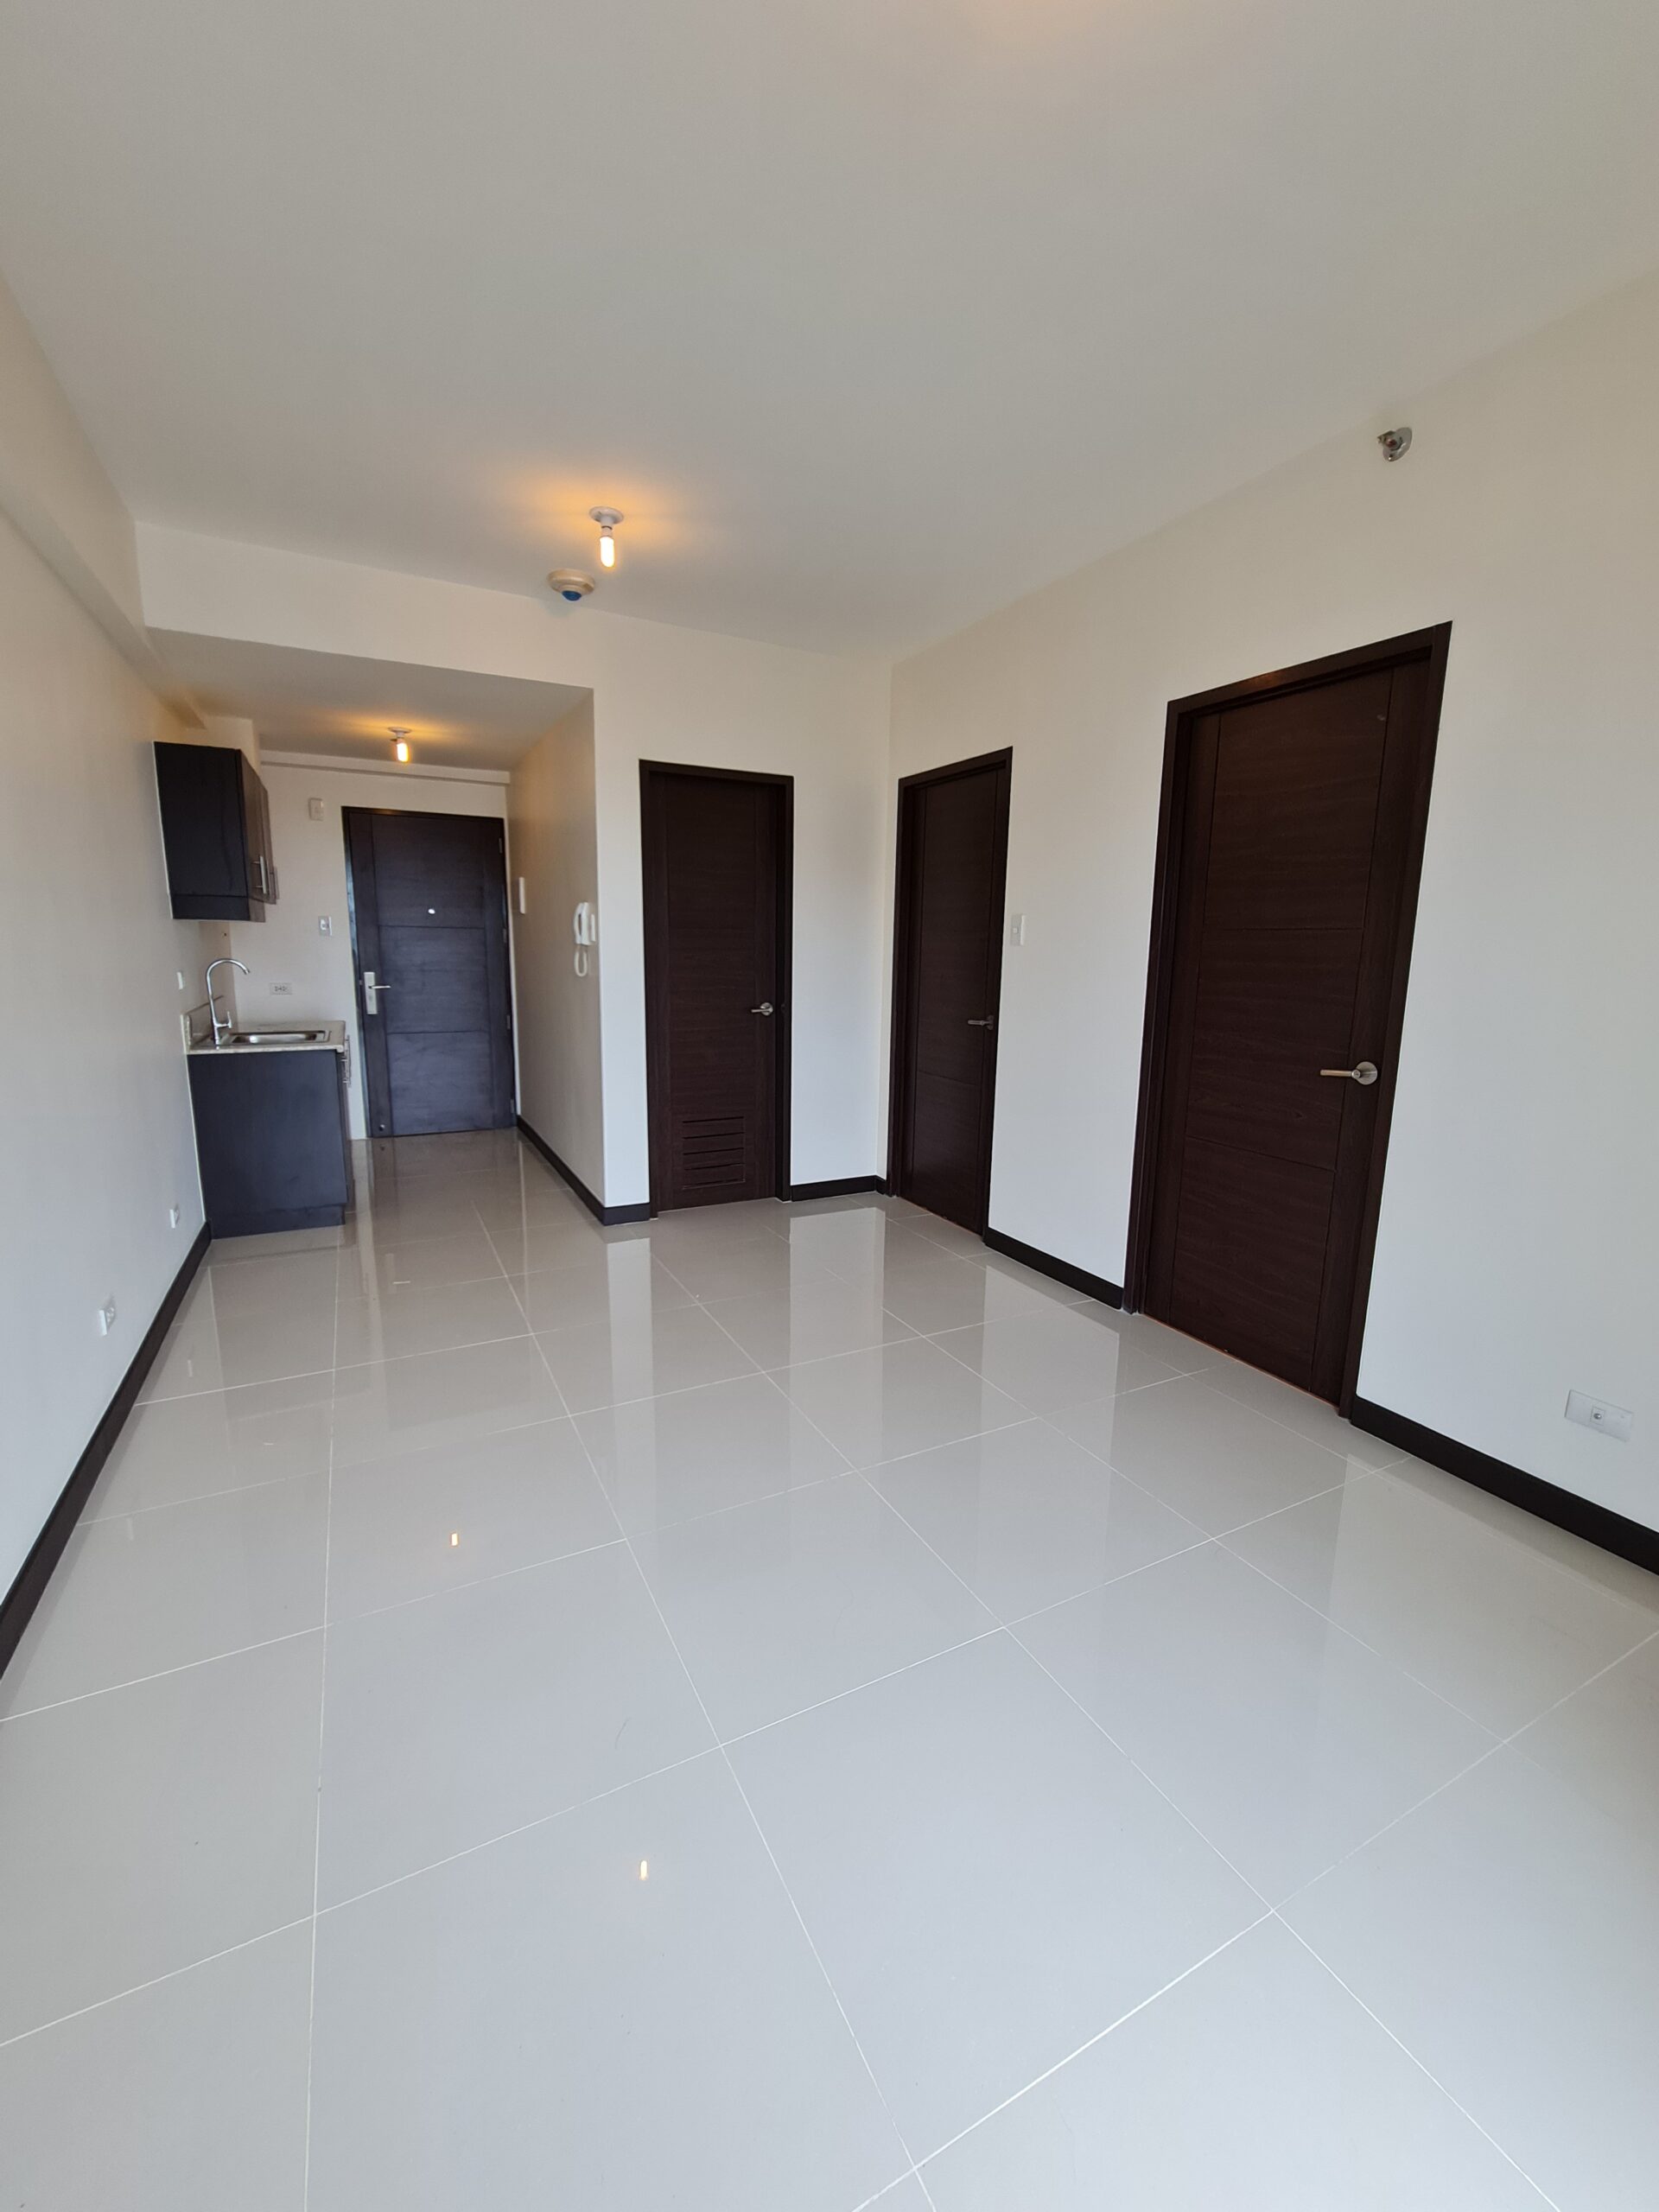 2 Bedroom For Sale in Robinsons Axis Mandaluyong